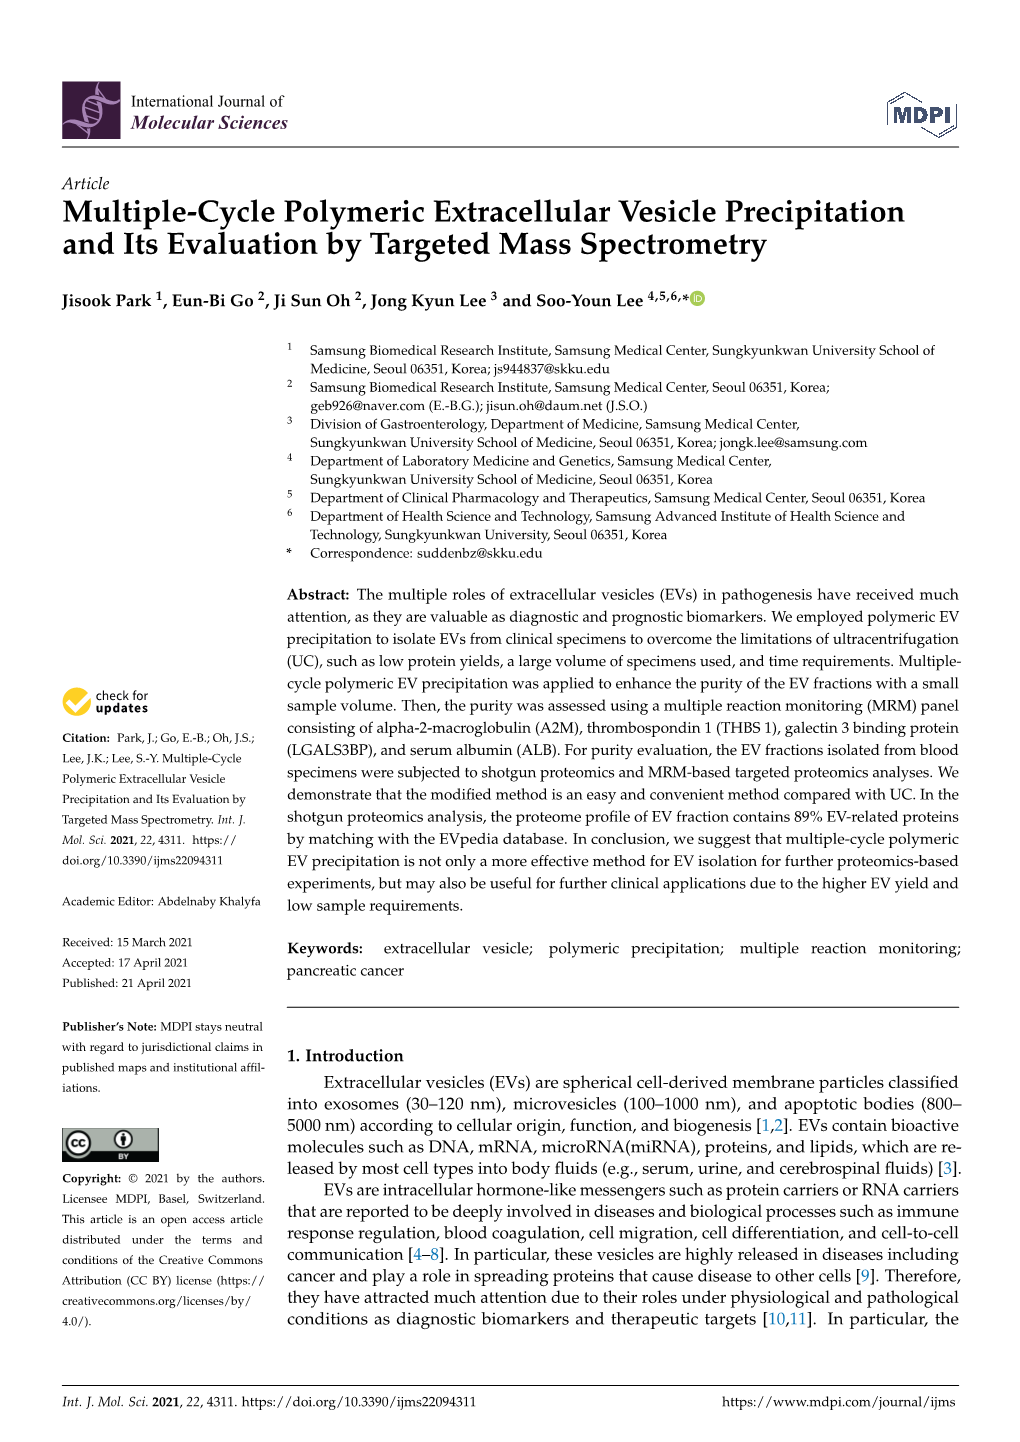 Multiple-Cycle Polymeric Extracellular Vesicle Precipitation and Its Evaluation by Targeted Mass Spectrometry